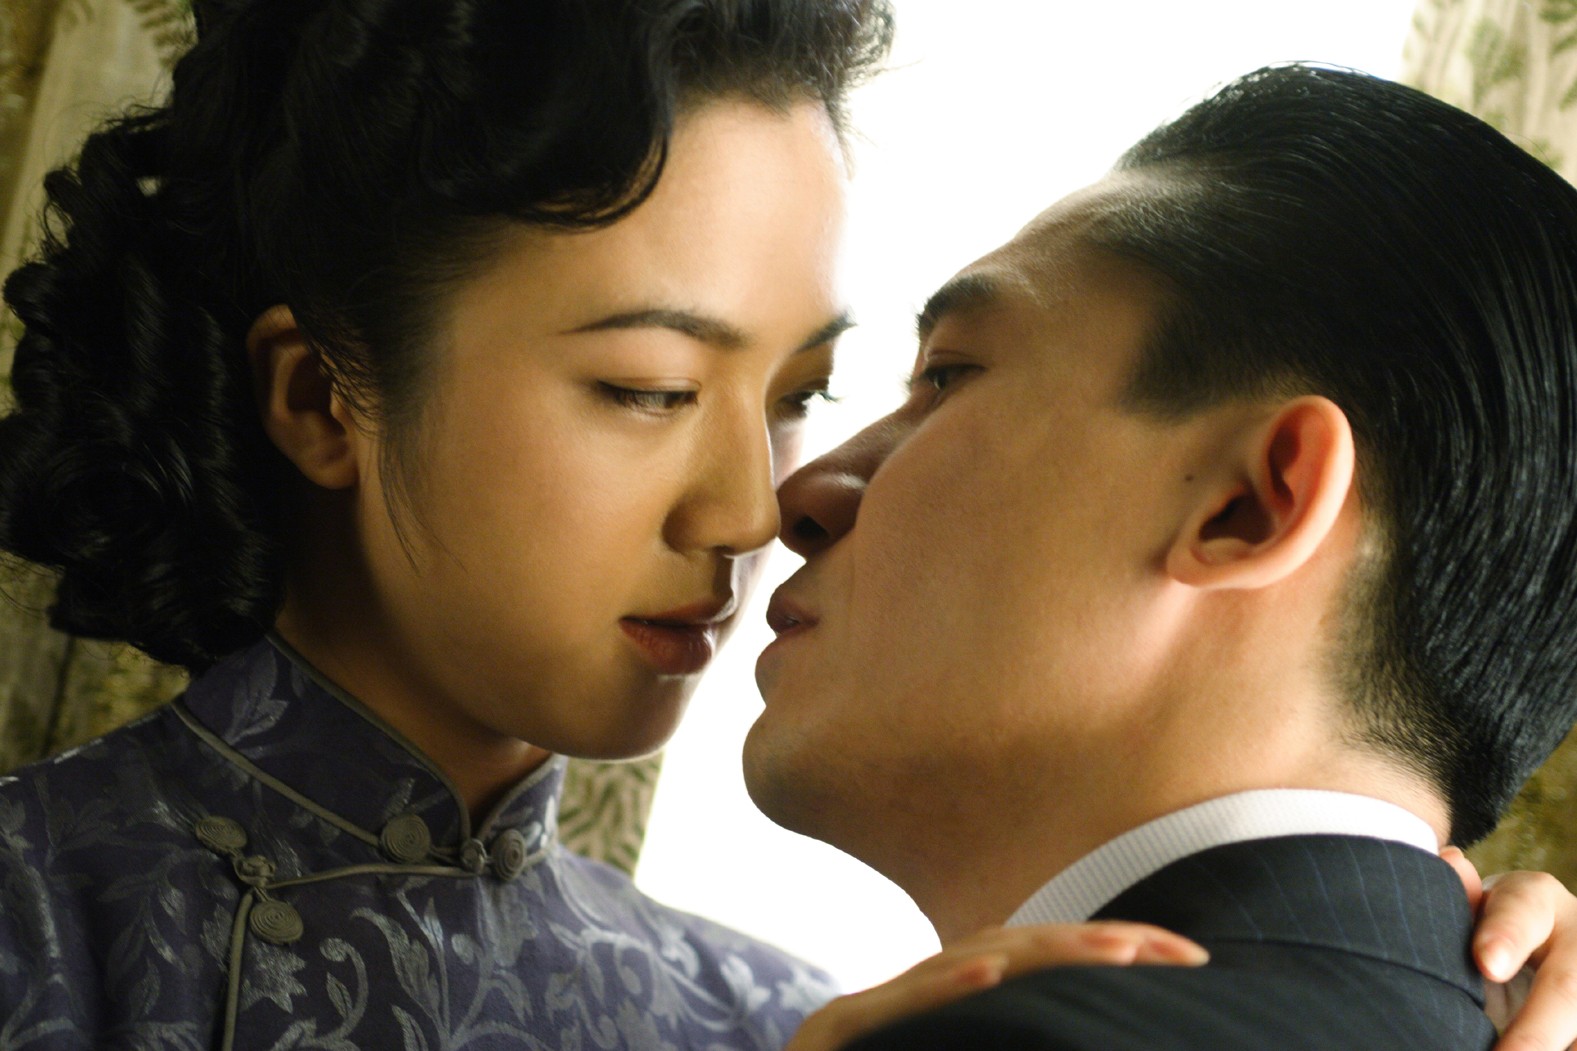 Tony Leung Chiu-wai and Tang Wei in a still from Lust, Caution. Photo: Edko Film